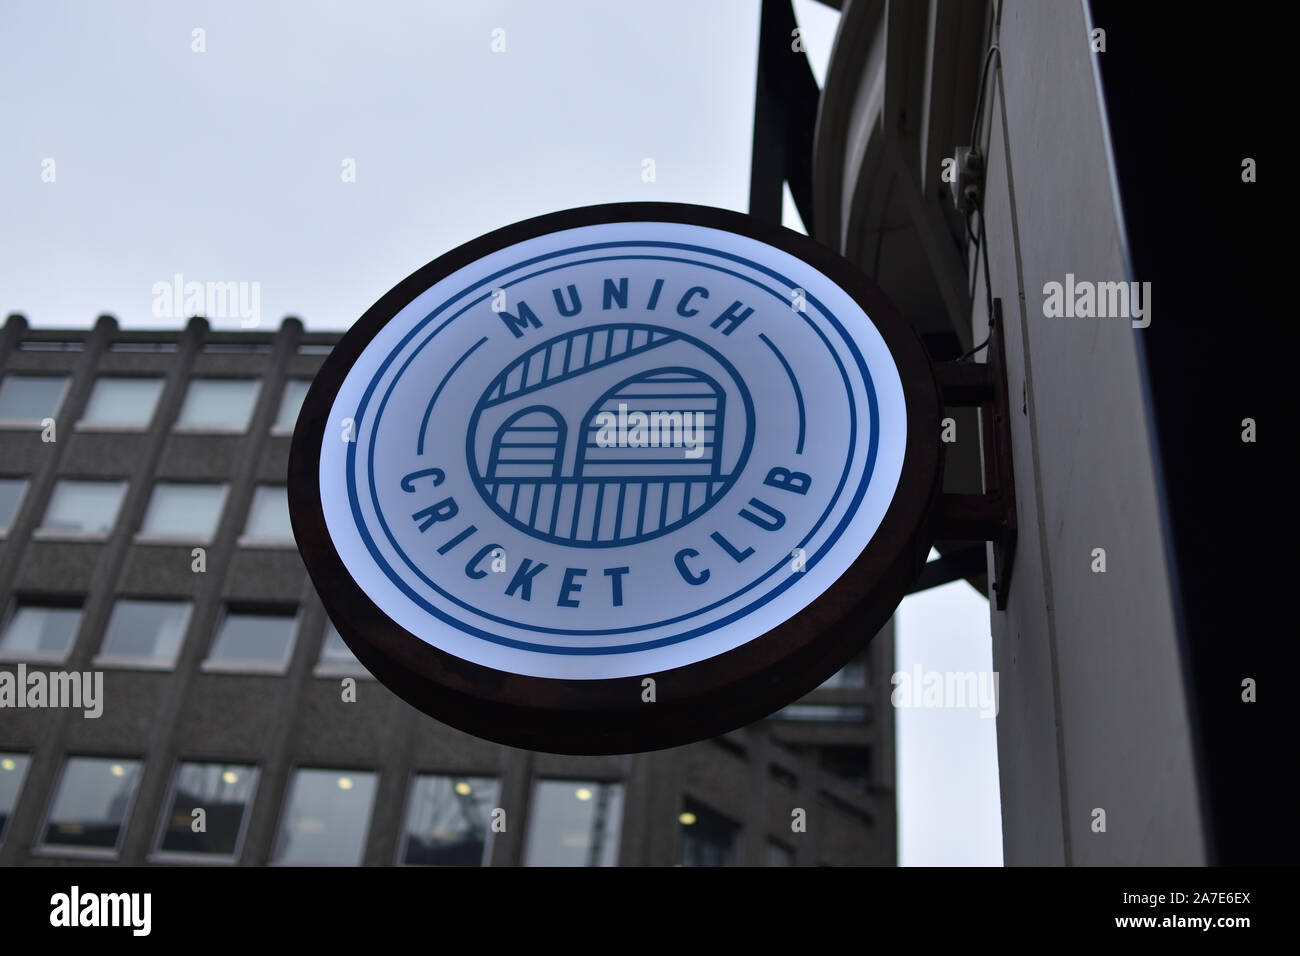 Munich Cricket Club bar sign in Westminster Stock Photo